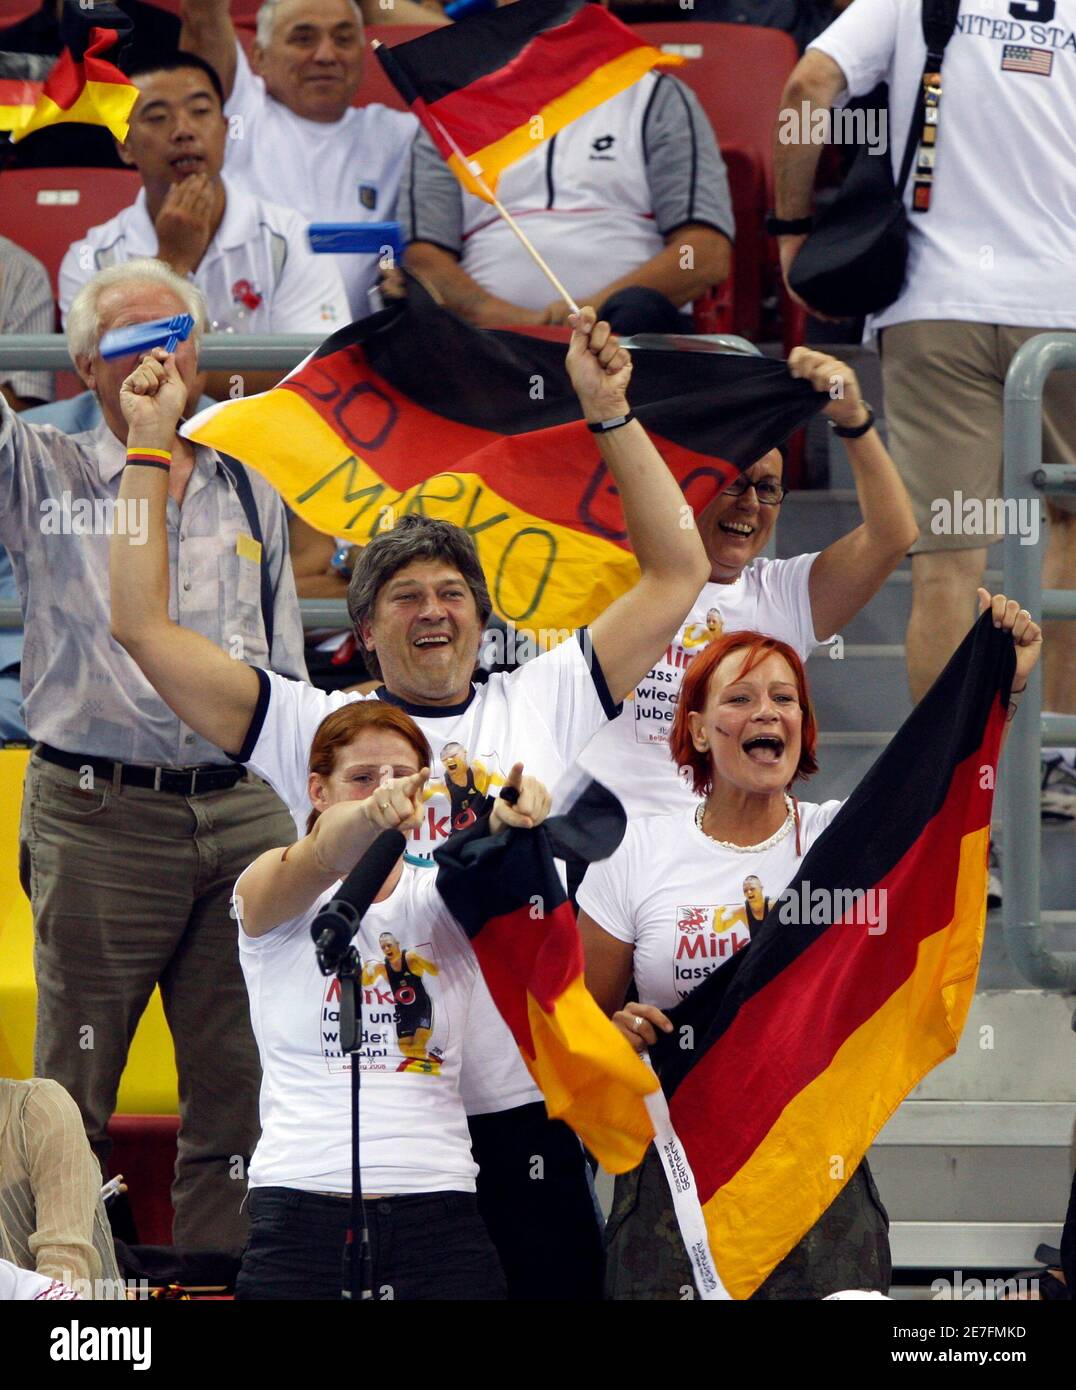 Supporters of Mirko Englich of Germany cheer for him during his 96kg men's Greco-Roman wrestling semi-final matchagainst Adam Wheeler of the U.S. at the Beijing 2008 Olympic Games August 14, 2008.     REUTERS/Oleg Popov (CHINA) Stock Photo